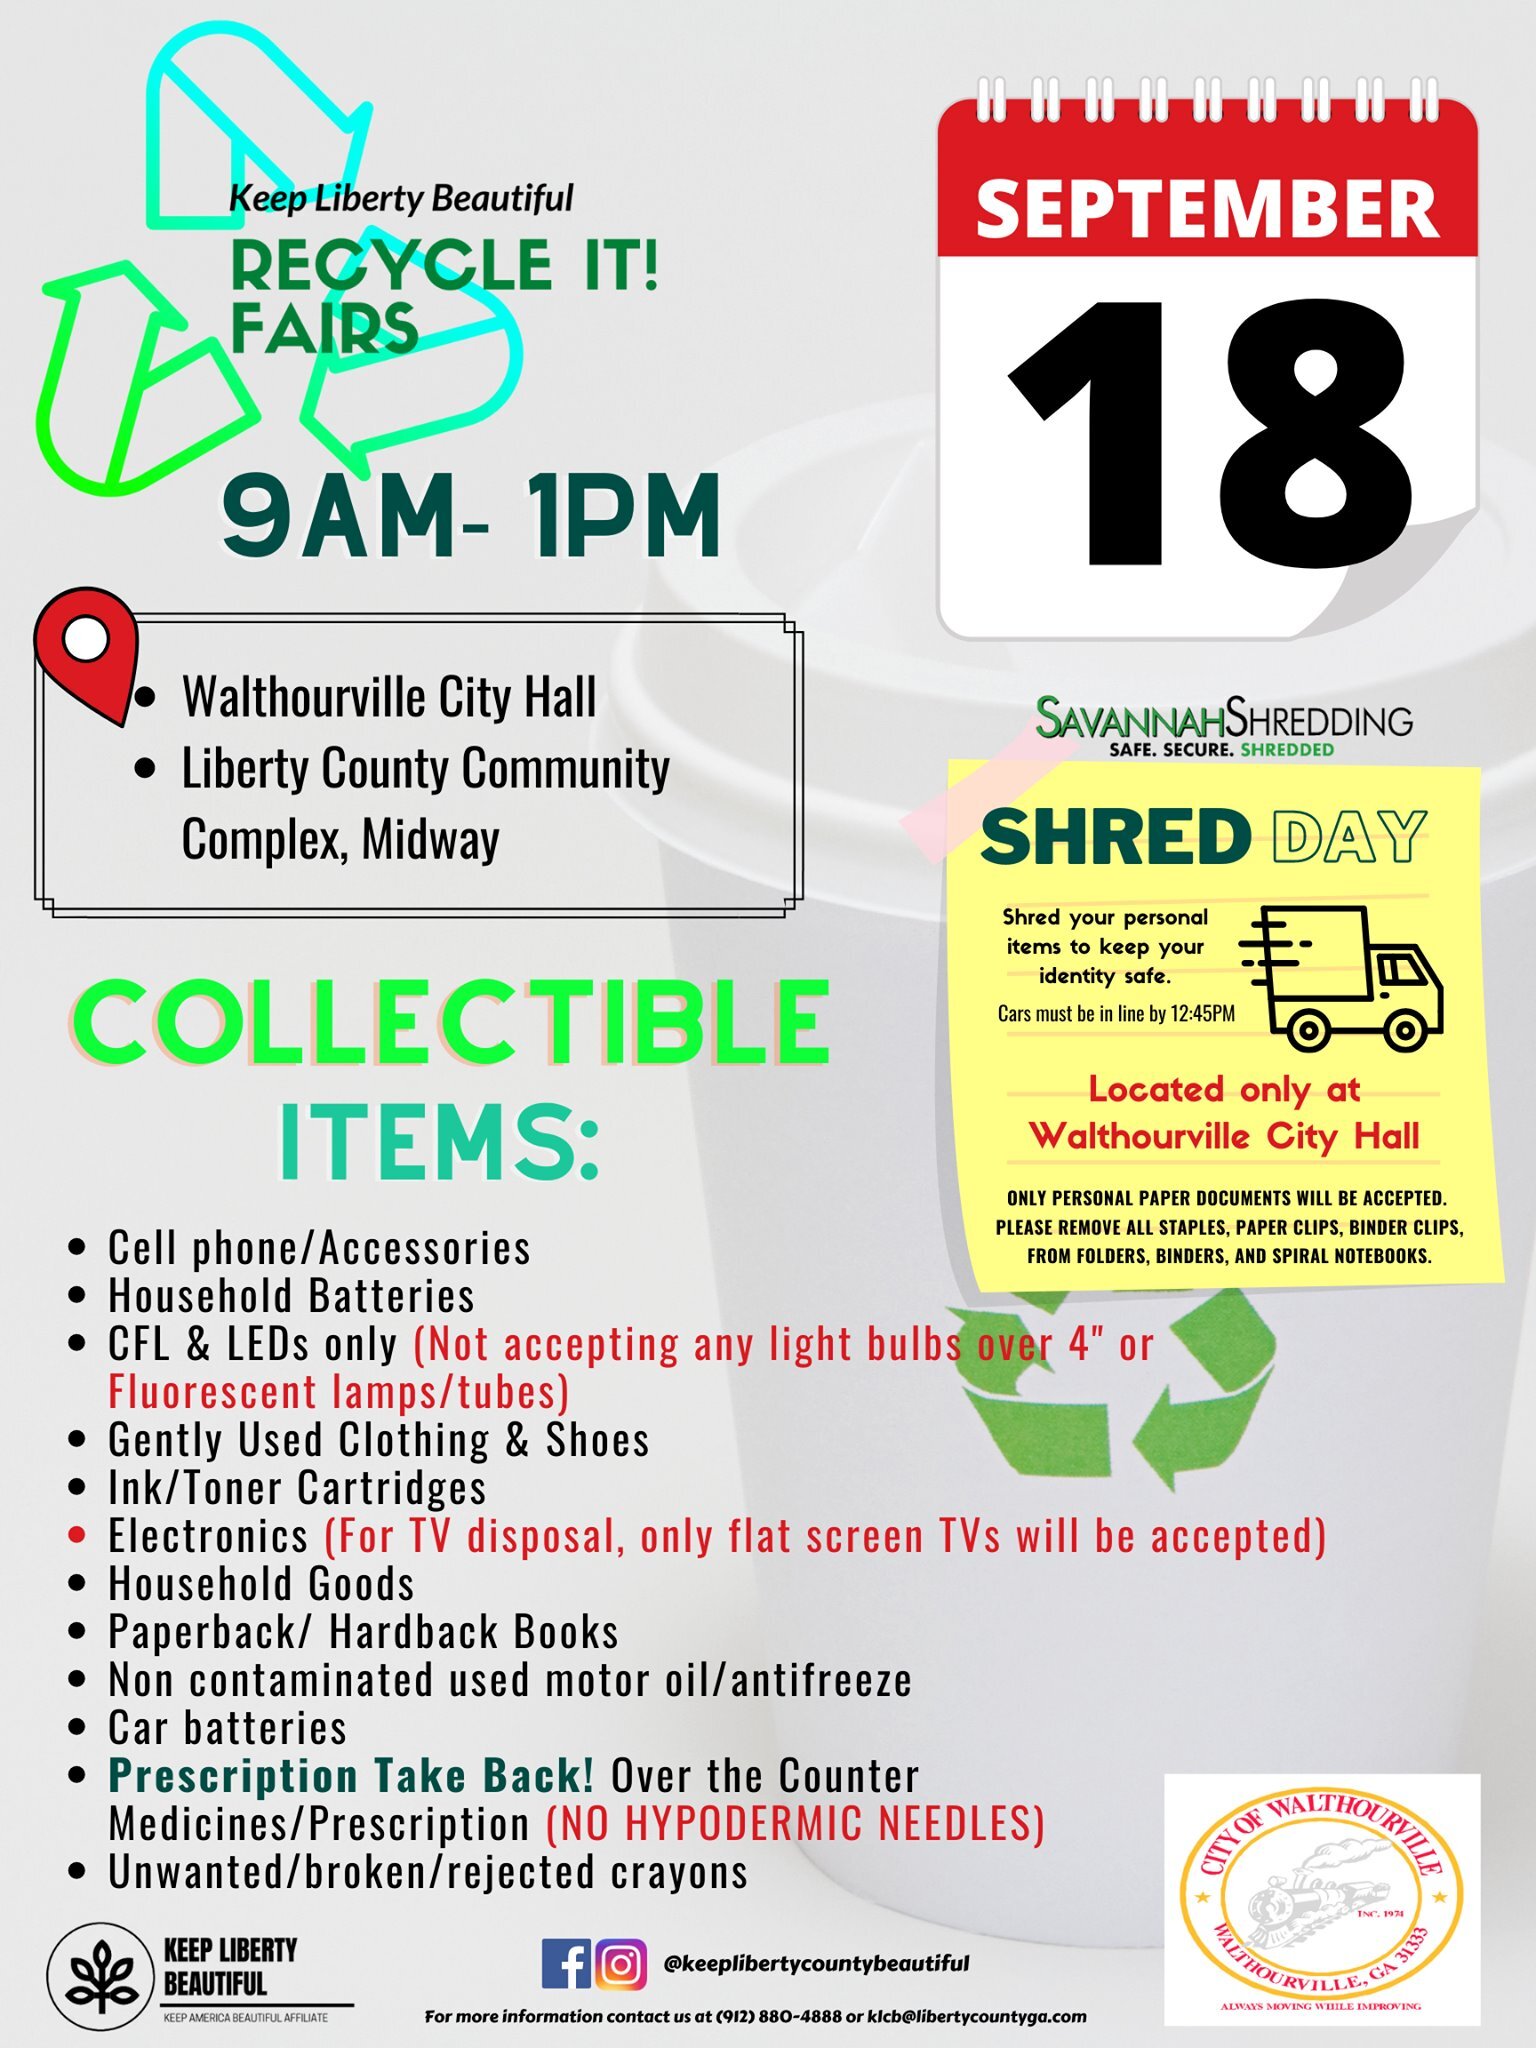 Recycle It! Fair flyer for Keep Liberty Beautiful